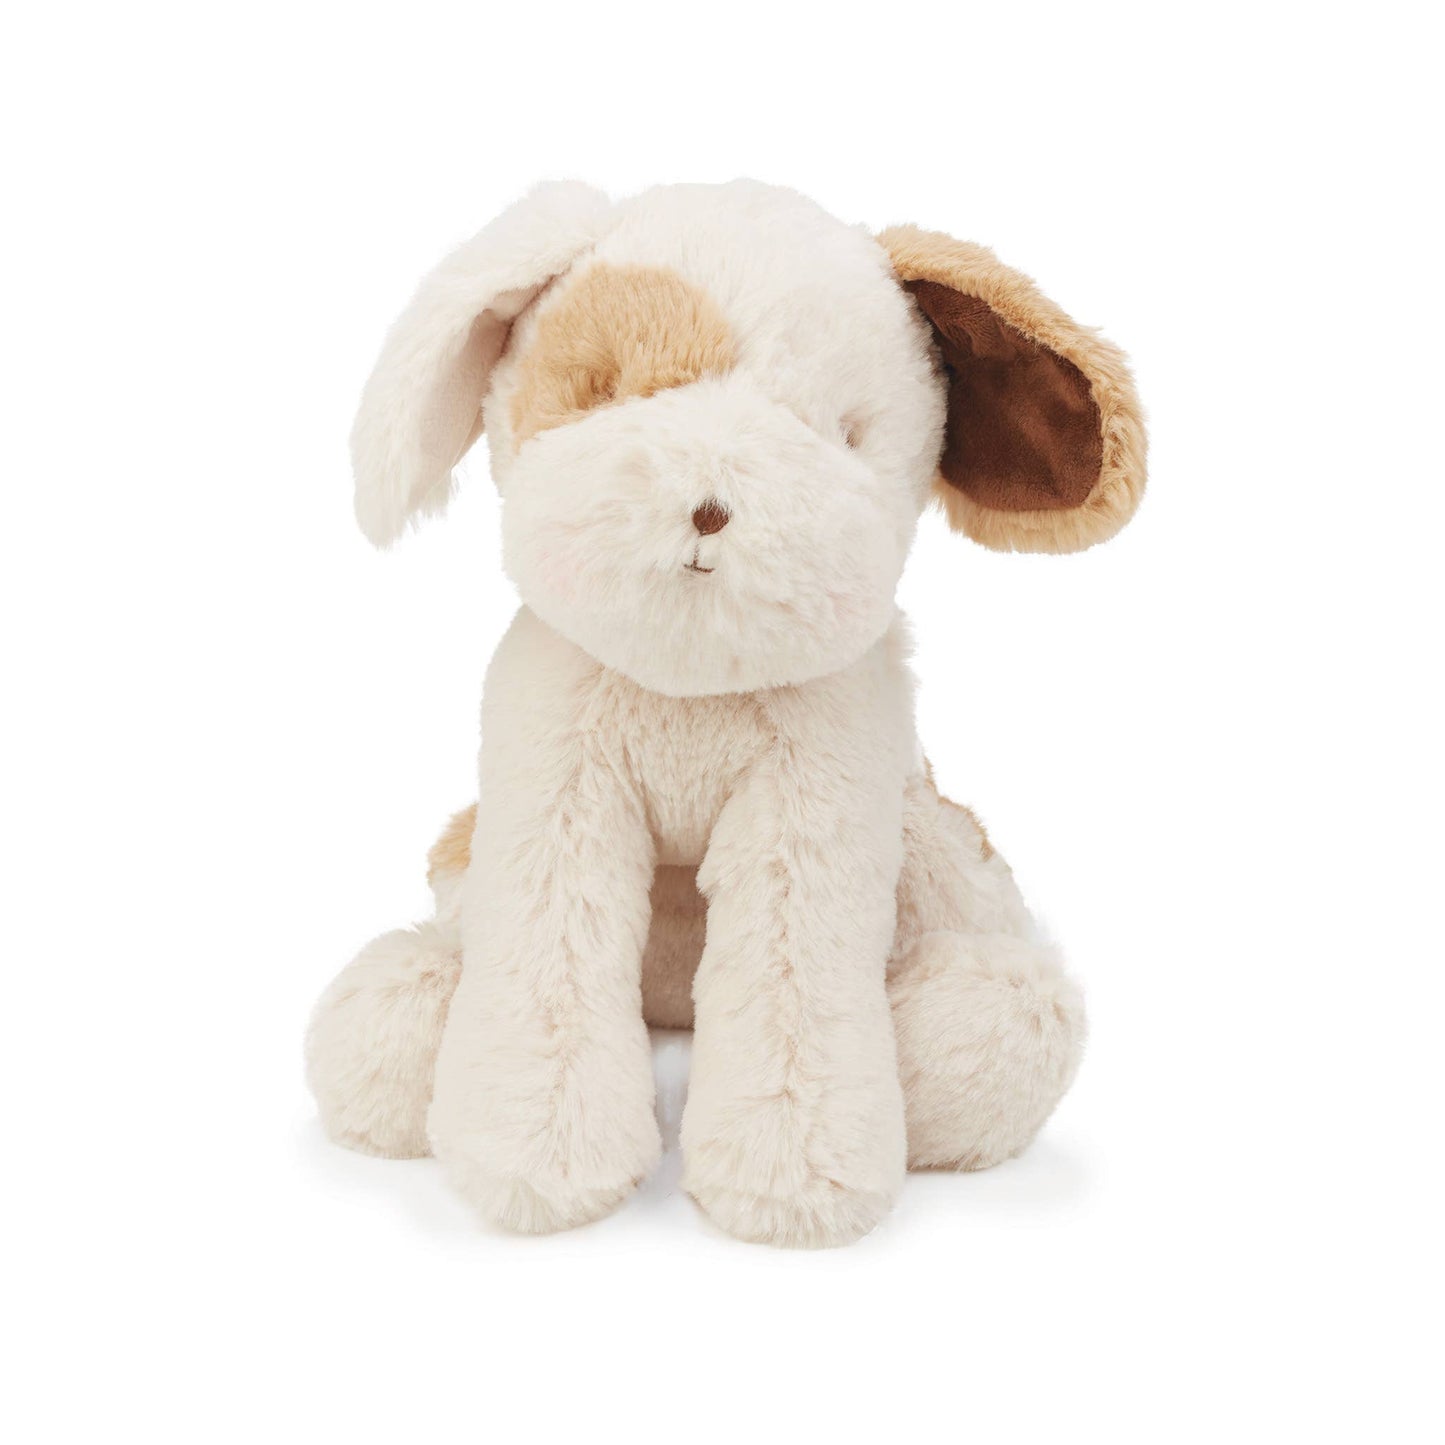 Little Skipit puppy stuffed animal by Bunnies by the Bay